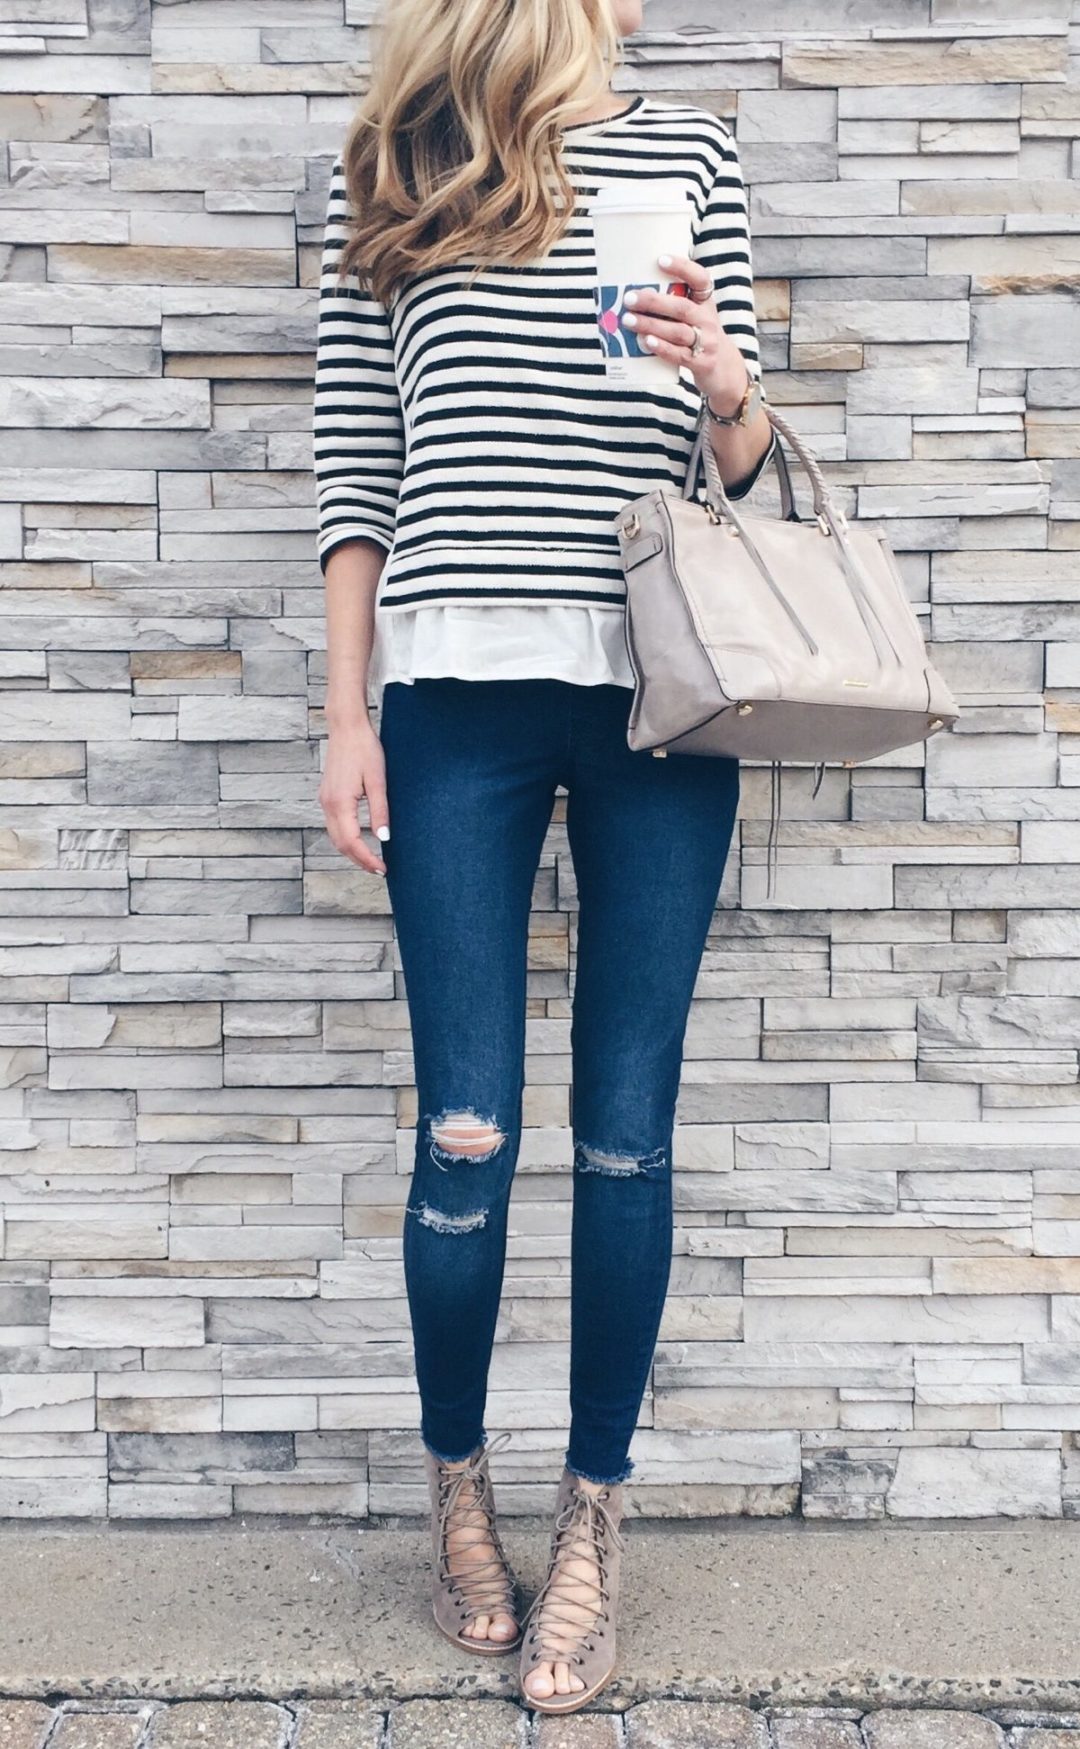 spring outfit idea: striped ruffle hem top with skinny jeans and lace up booties